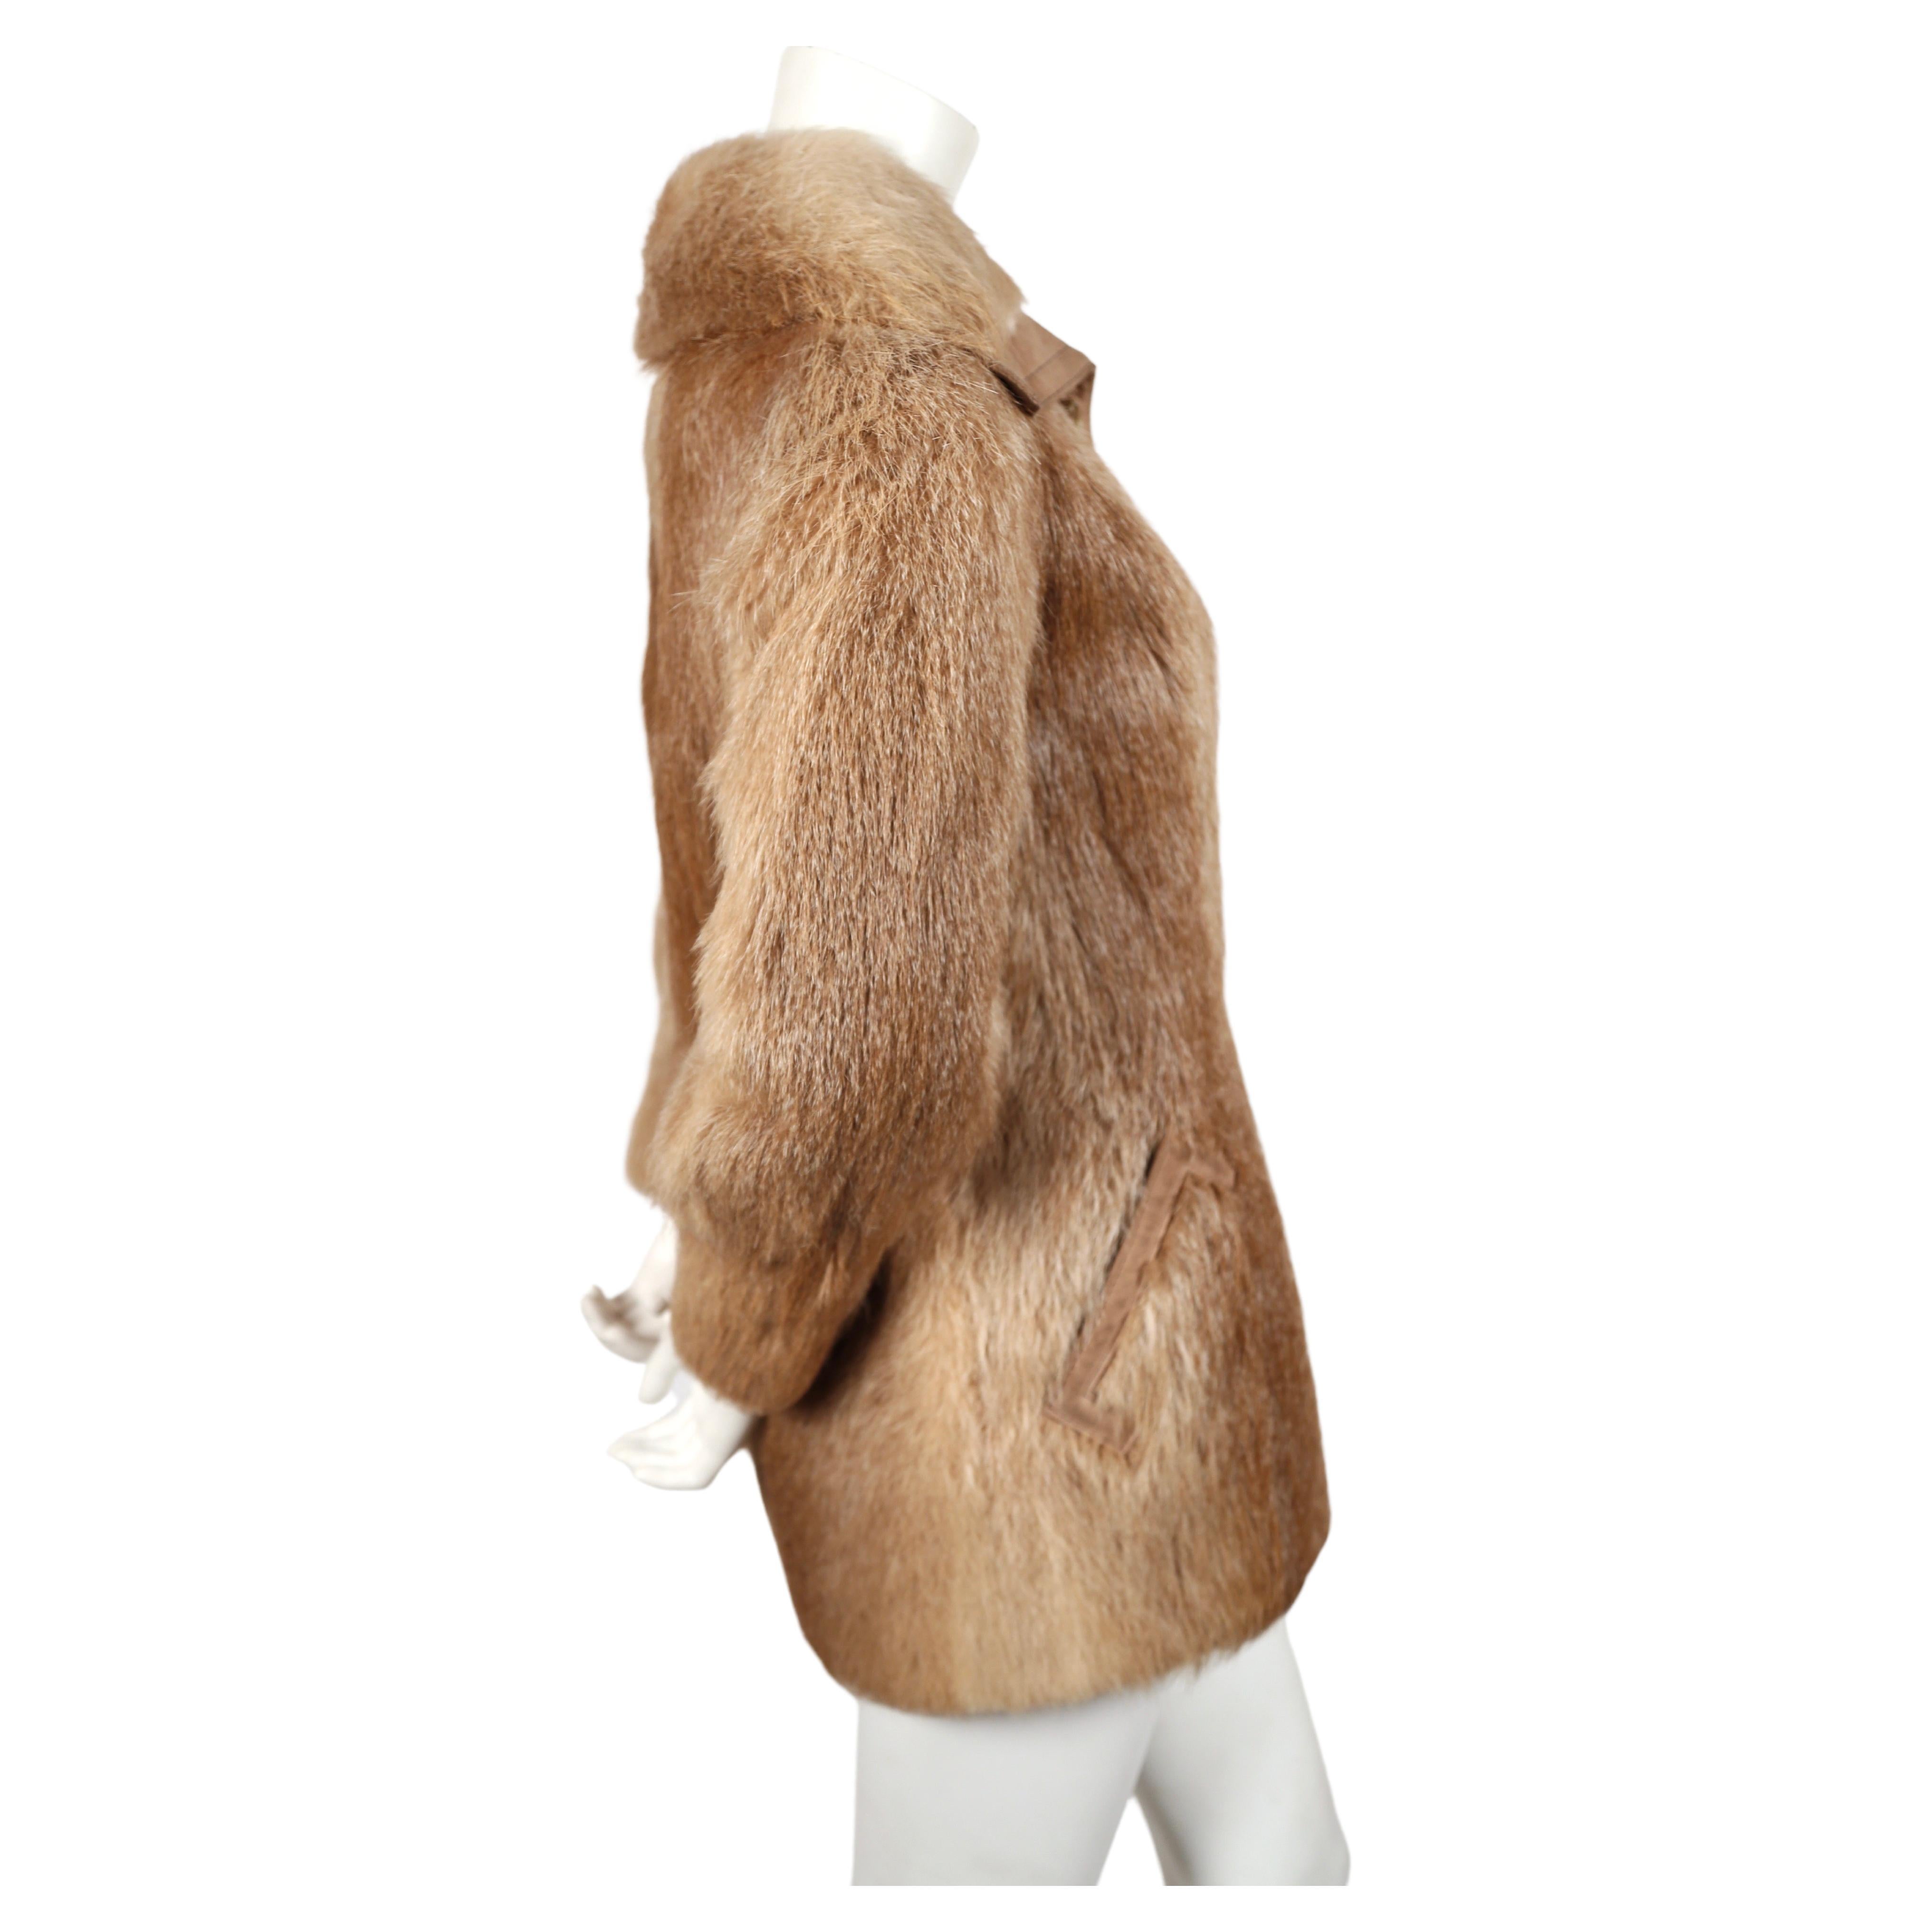 Nutria fur coat with large collar and suede trim from Halston dating to the late 1970's. Fits a size 4 or 6. Approximate measurements: 15